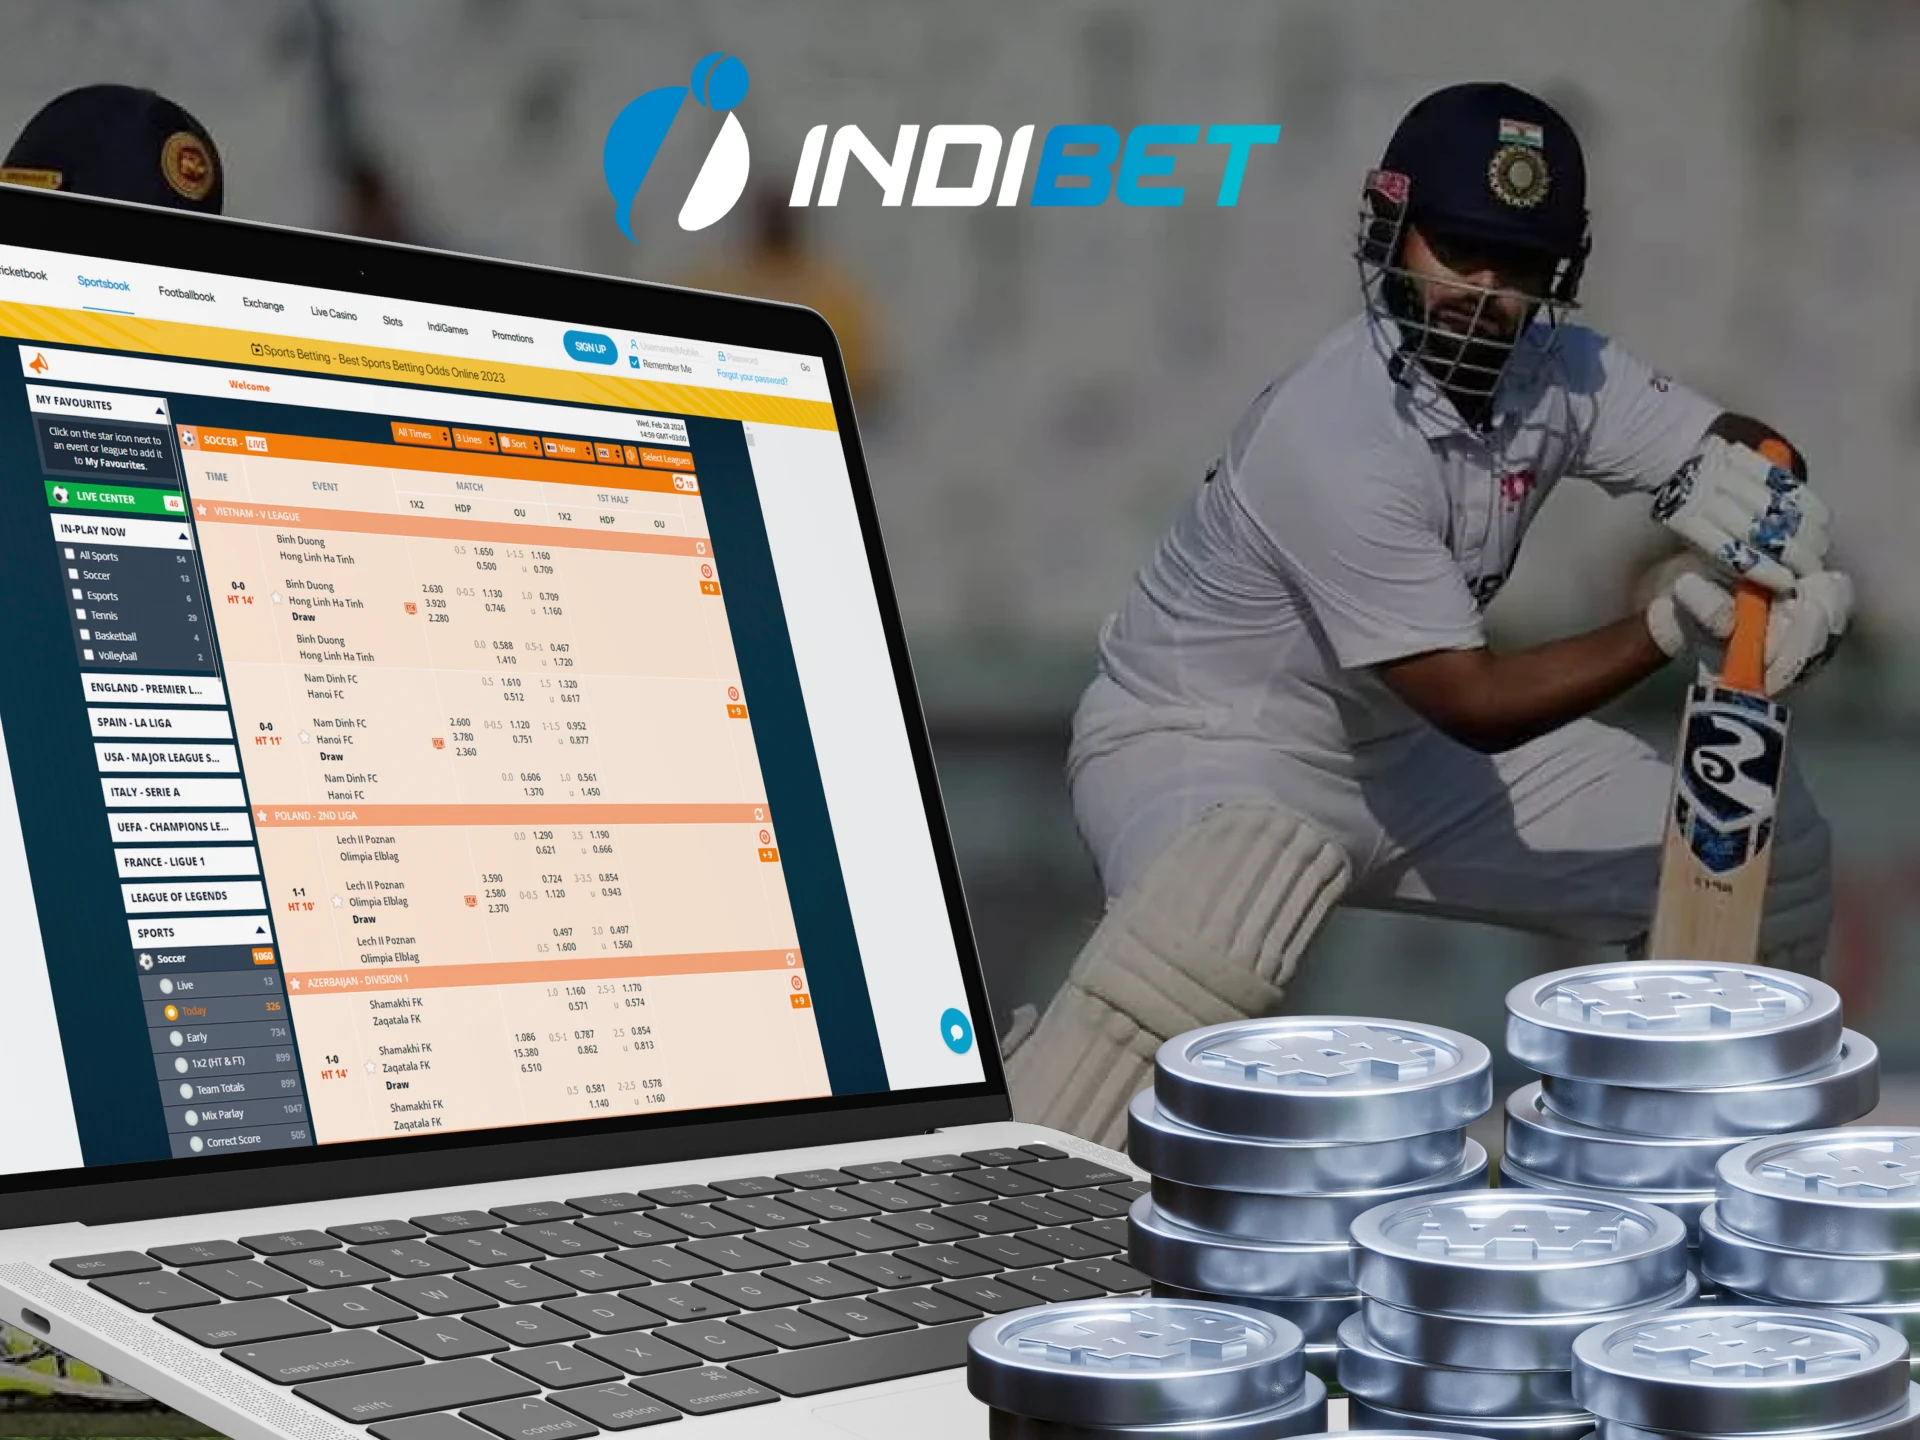 Bet on sports using cryptocurrency at Indibet.